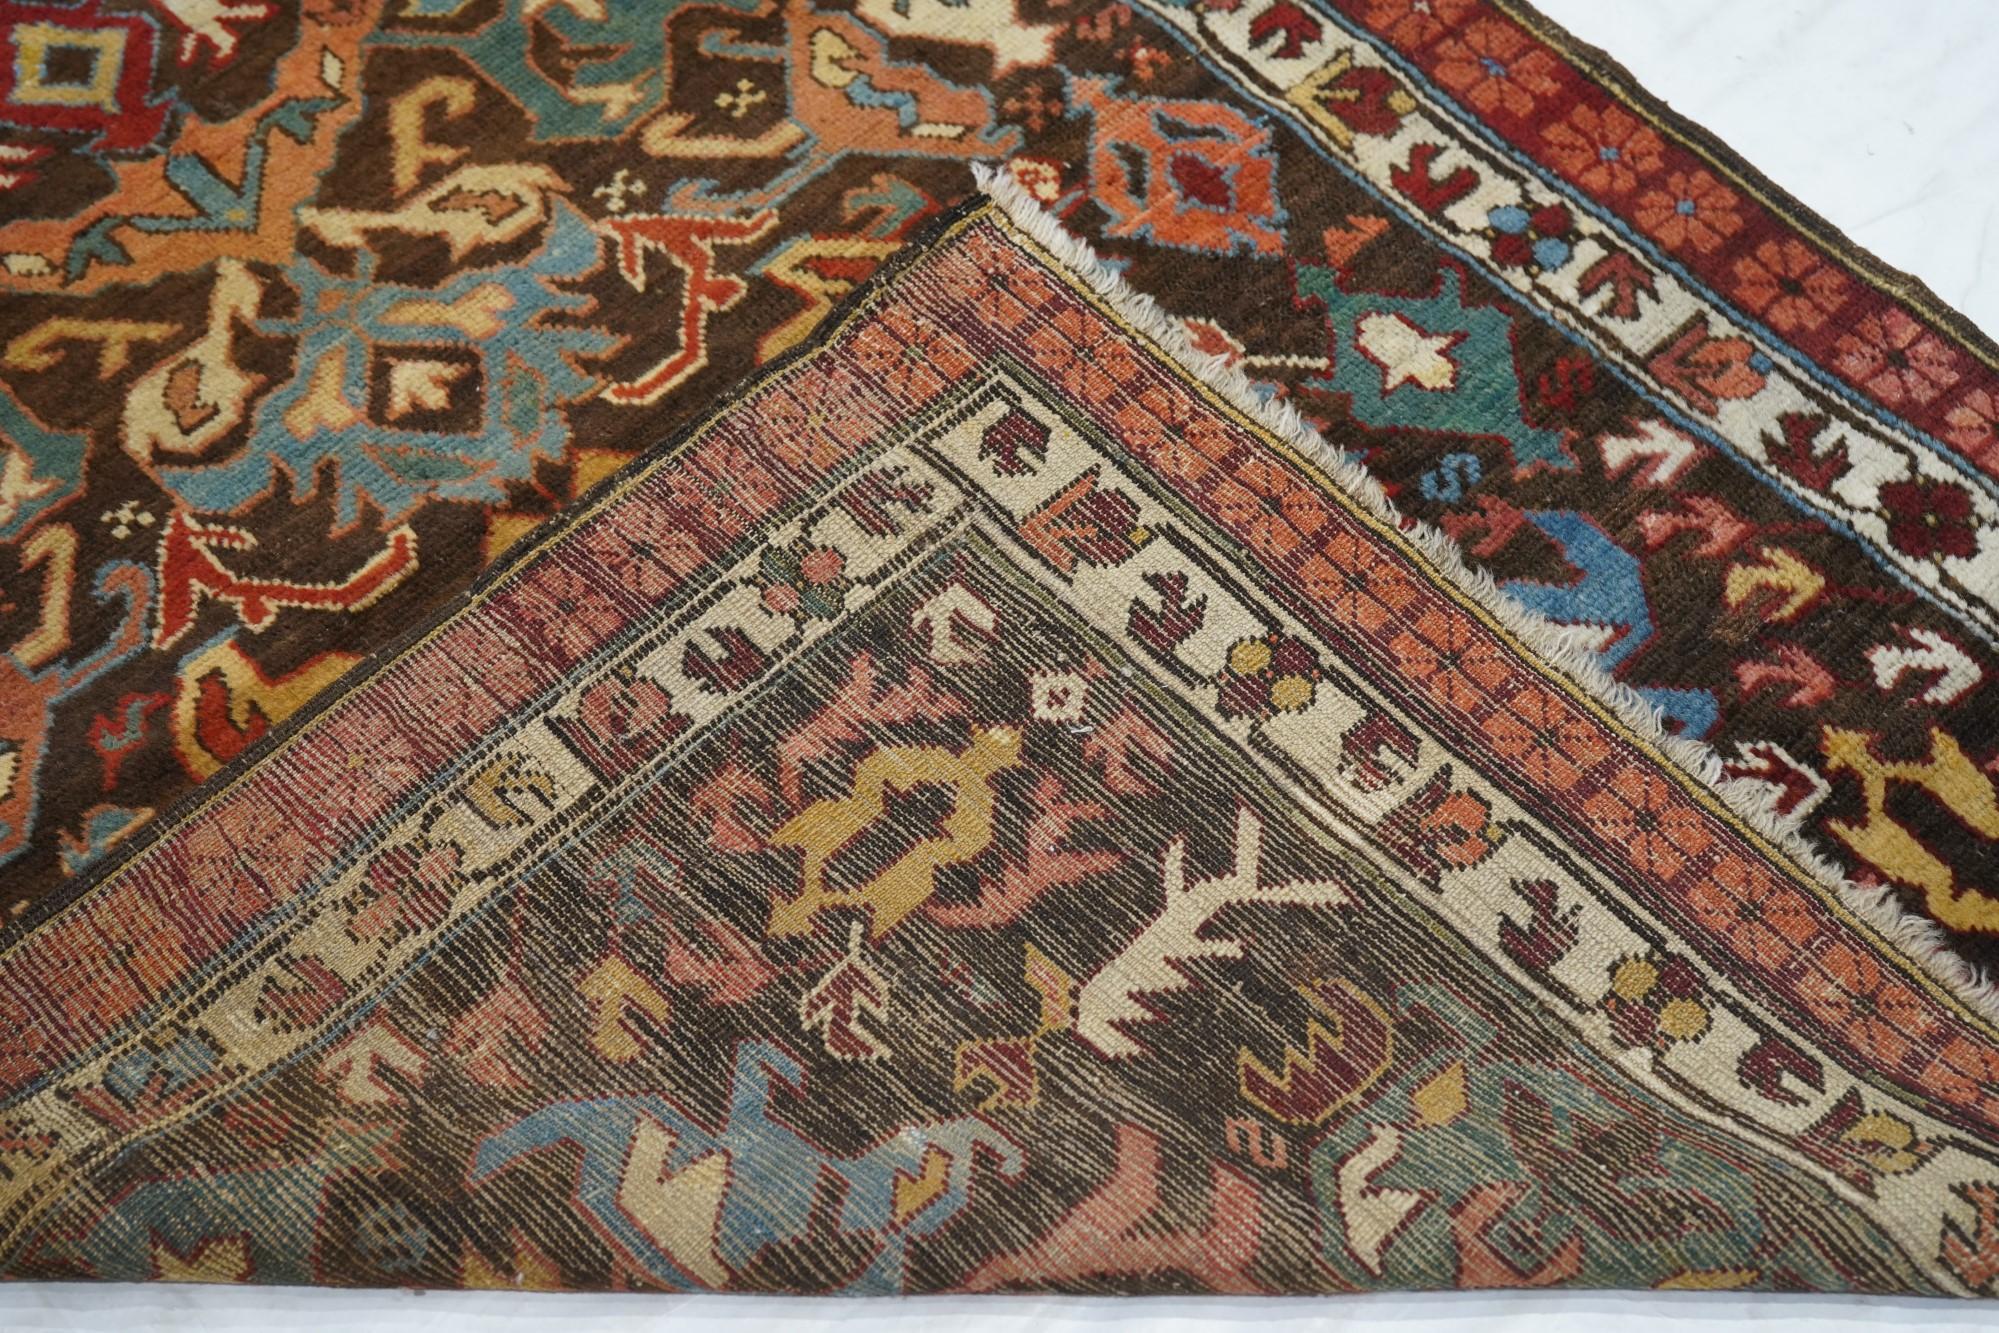 Antique Bijov Rug 3'5'' x 5'. West Caspian/East Caucasian rustic scatter with a characteristic abstract ascending leaf, palmette and flower design. Usually found on long rugs, but less so on small scatters. Dark blue ground, yellow, rust, teal light